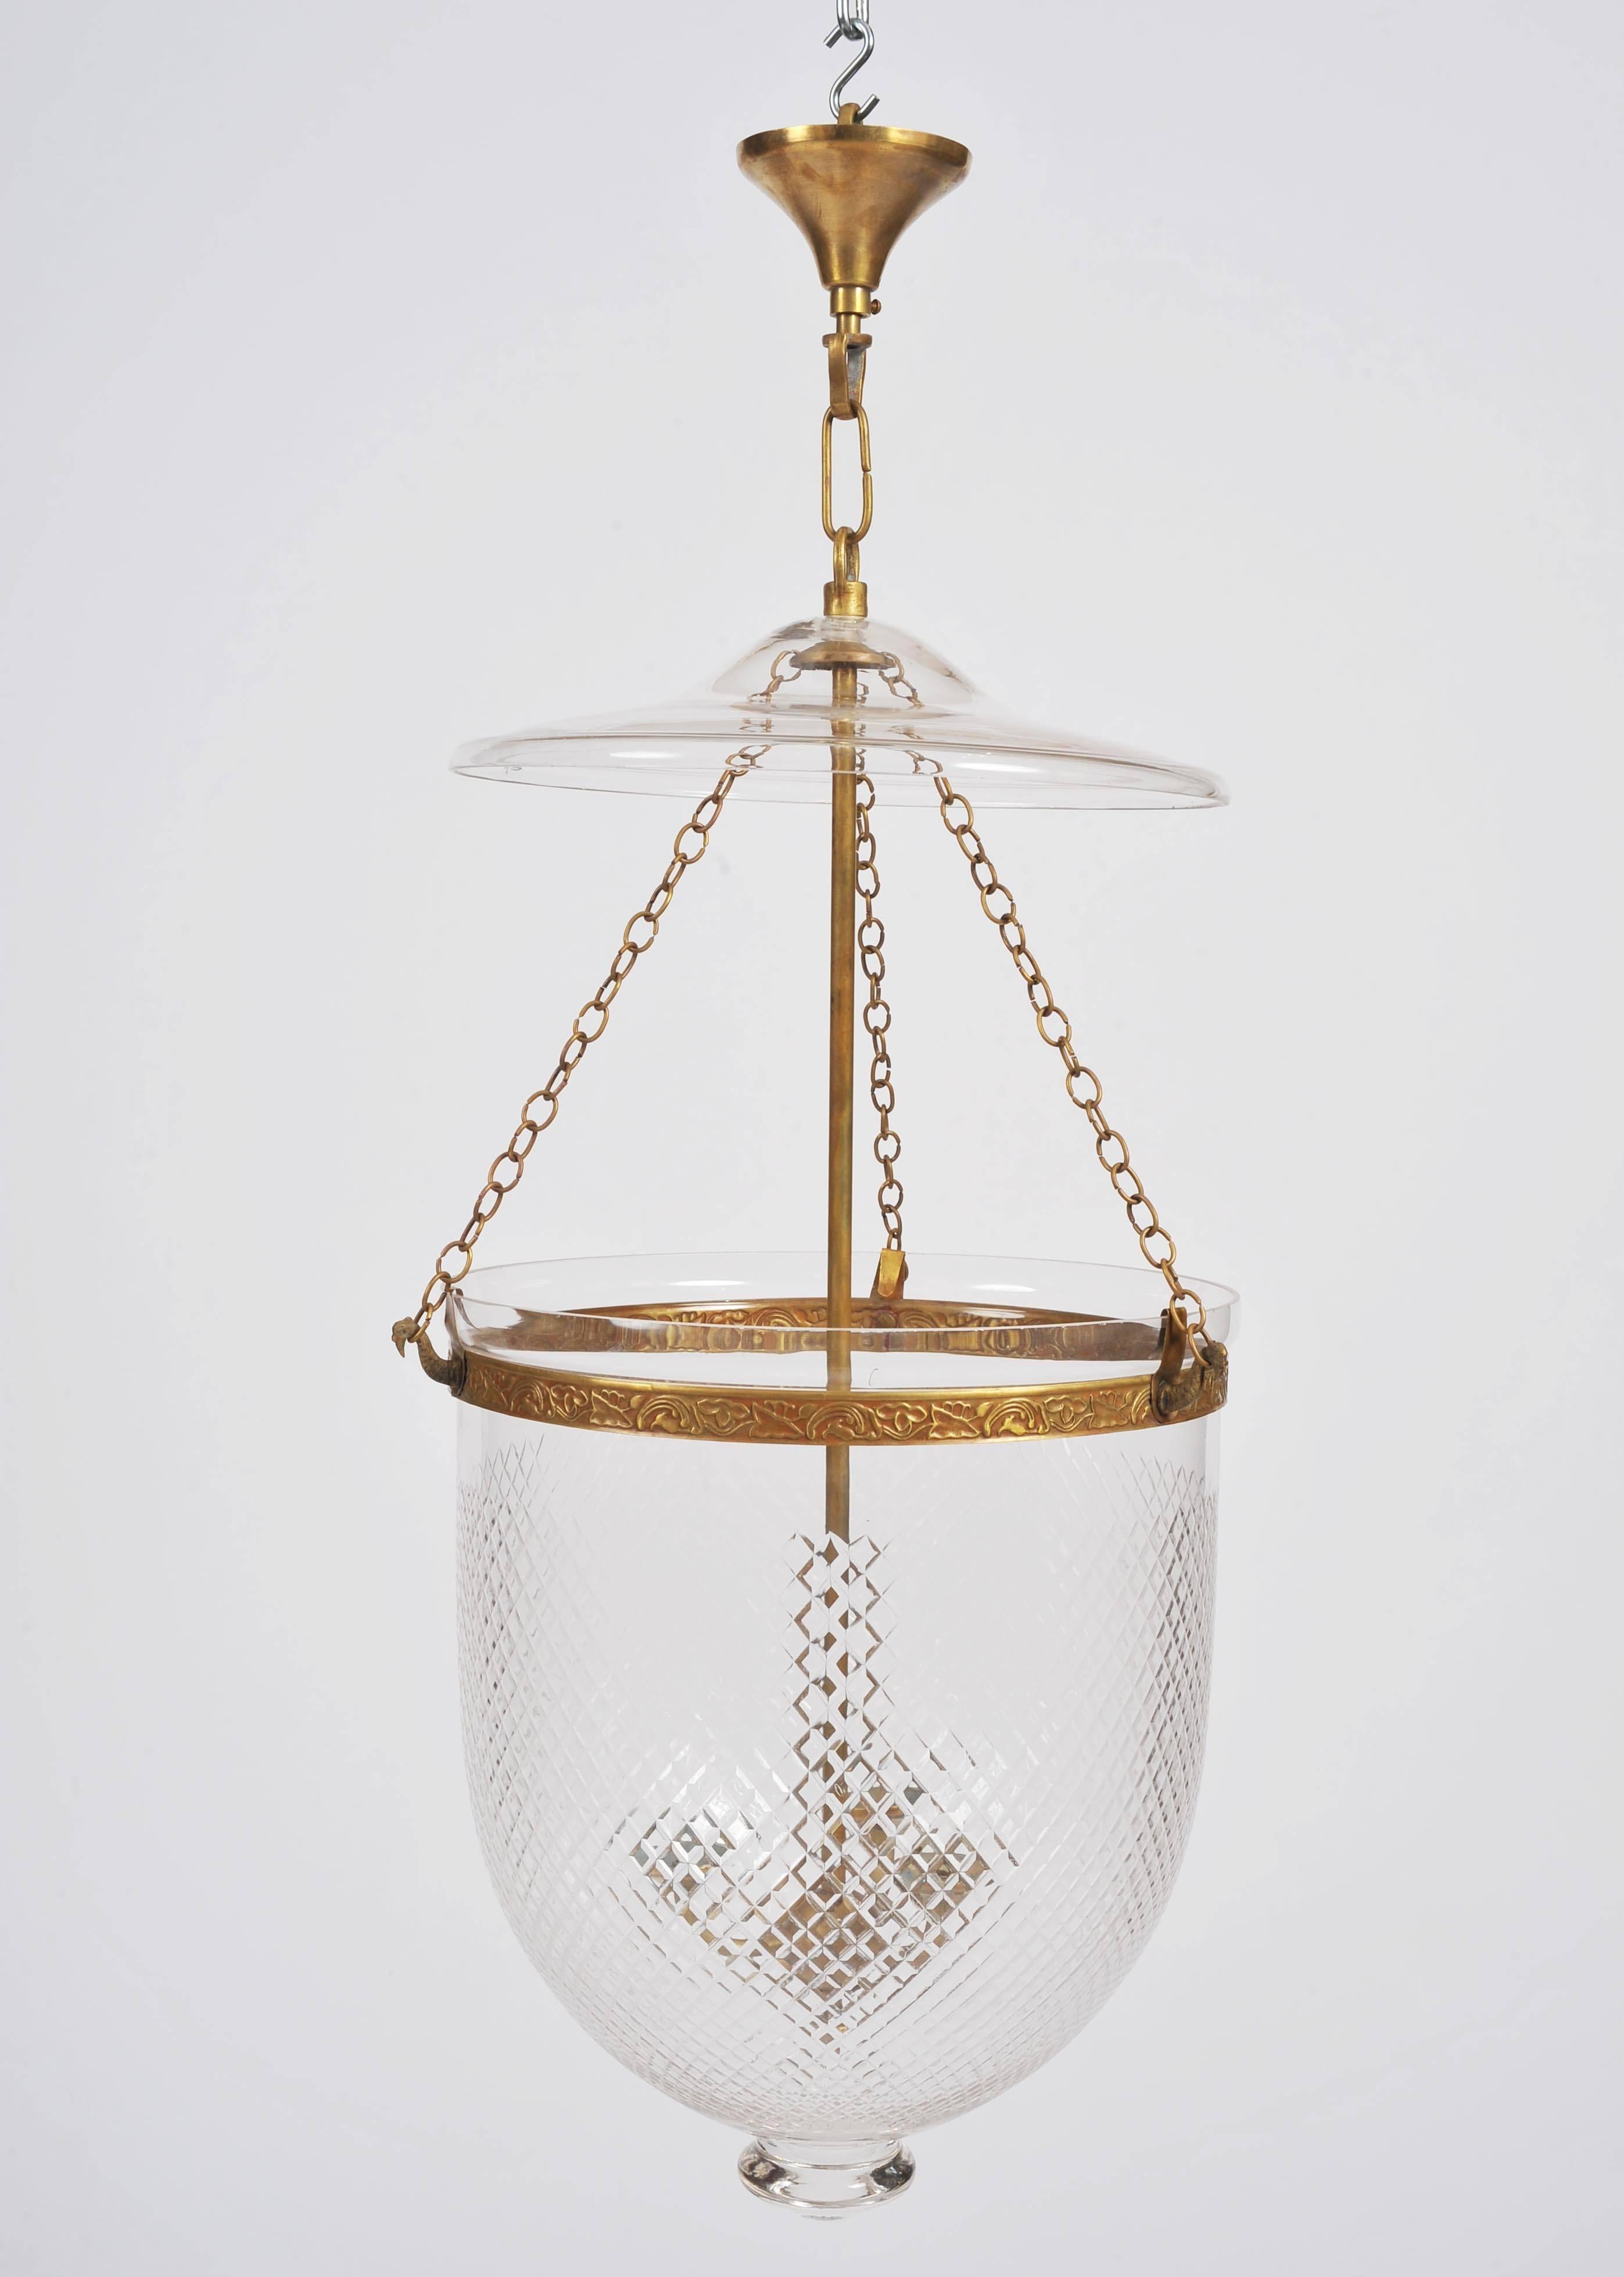 Contemporary Large Storm Lantern with Brass Fittings